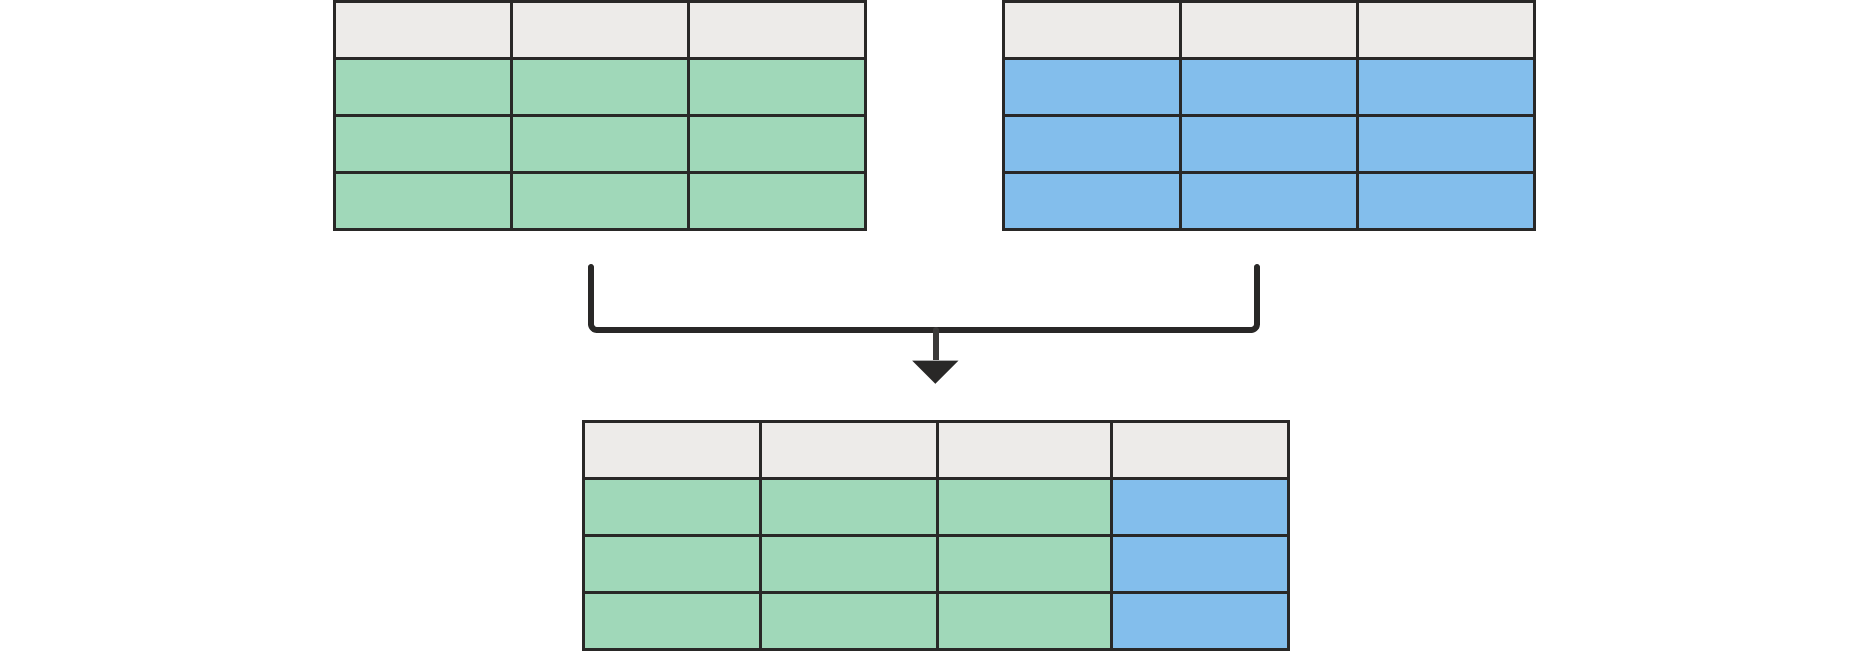 Diagram showing two empty tables on top merged to a table on the bottom with all columns from the left table and one from the right table.